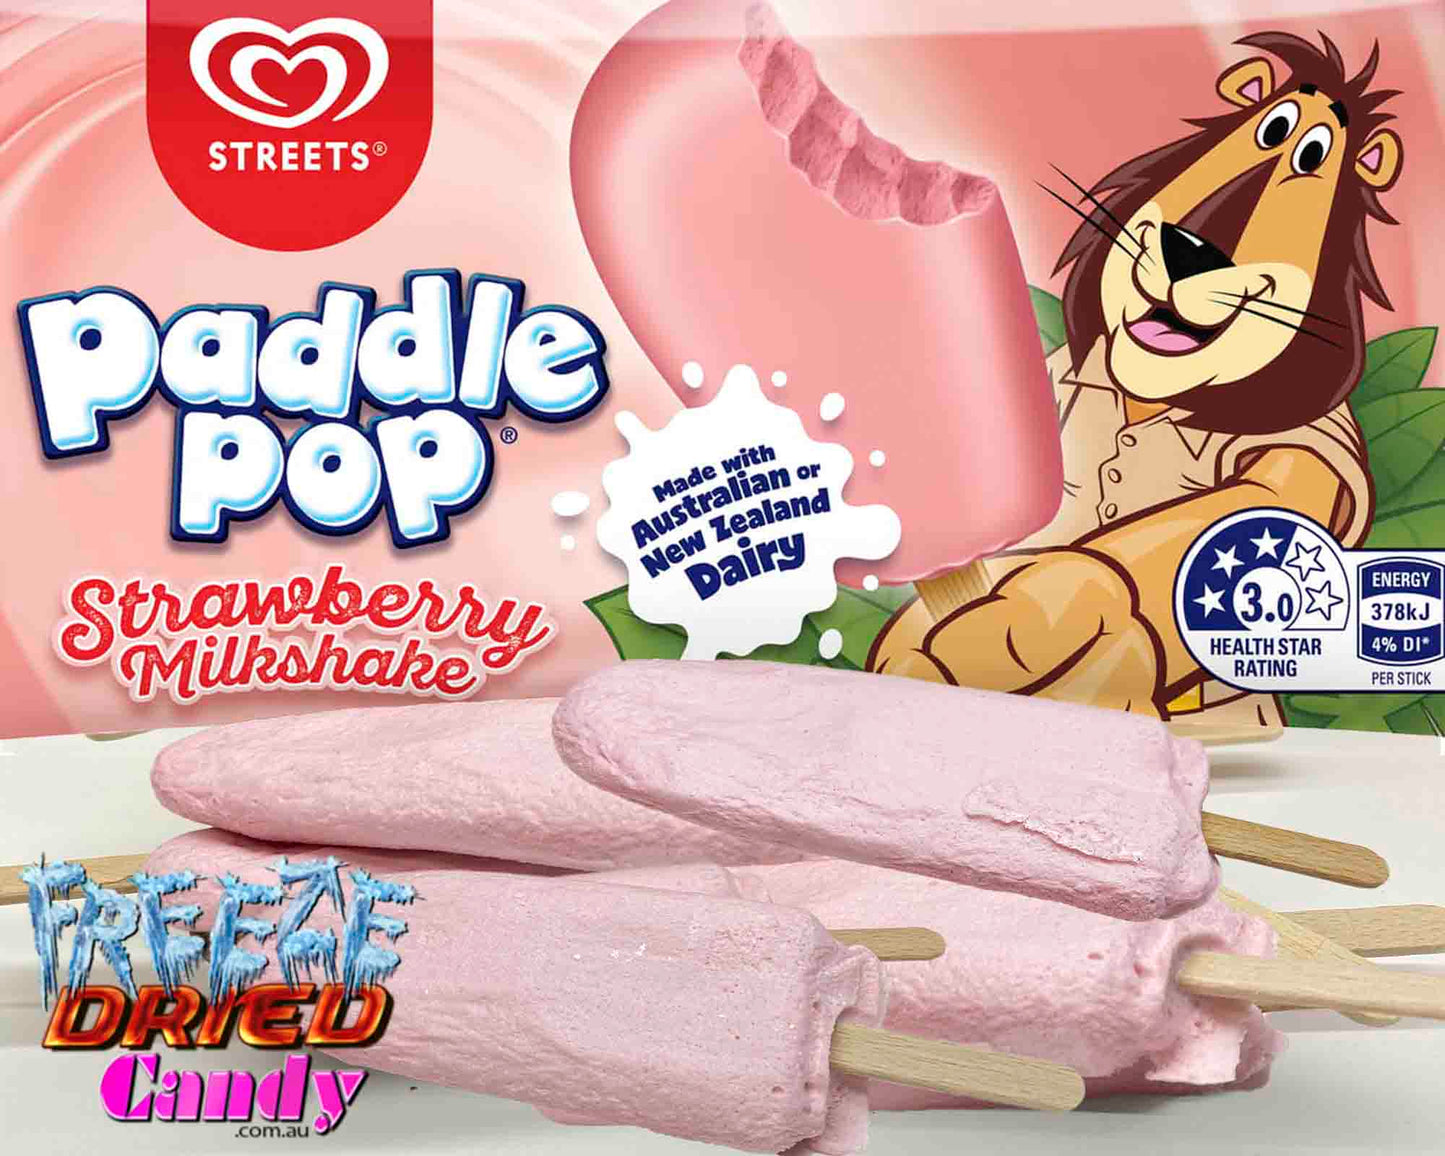  Freeze Dried  Ice Cream - Paddle Pop - Strawberry Milkshake Love that paddle pops have been around for years. A great ice cream snack. The grand kids love them., and the not so little kids too! Freeze Dried  Ice Cream - Paddle Pop - Strawberry Milkshake is smooth and sweet and straw-delicious.  It's light, airy, crunchy and full of flavor.      